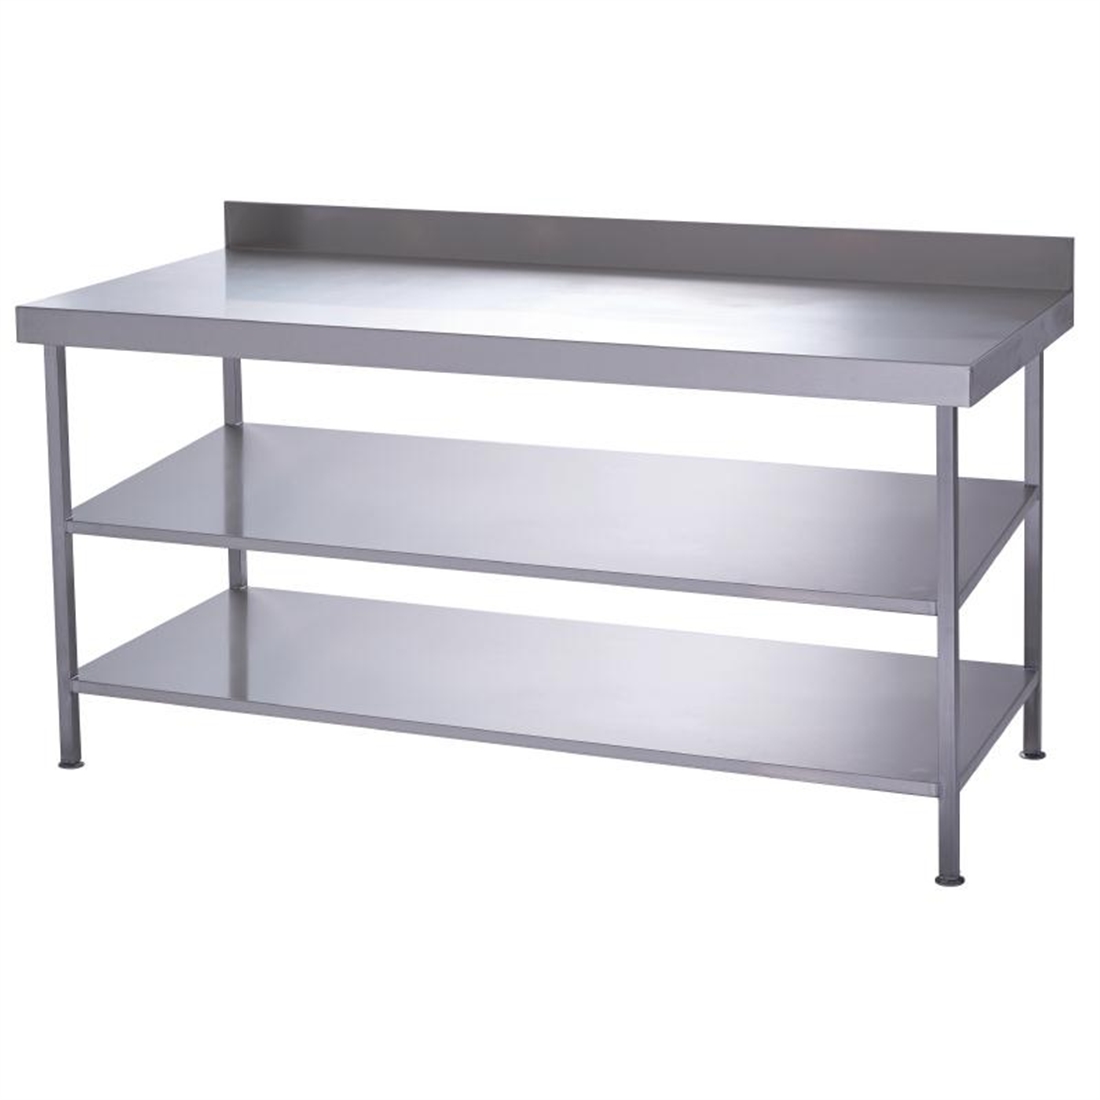 Parry Fully Welded Stainless Steel Wall Table 2 Undershelves 600x600mm